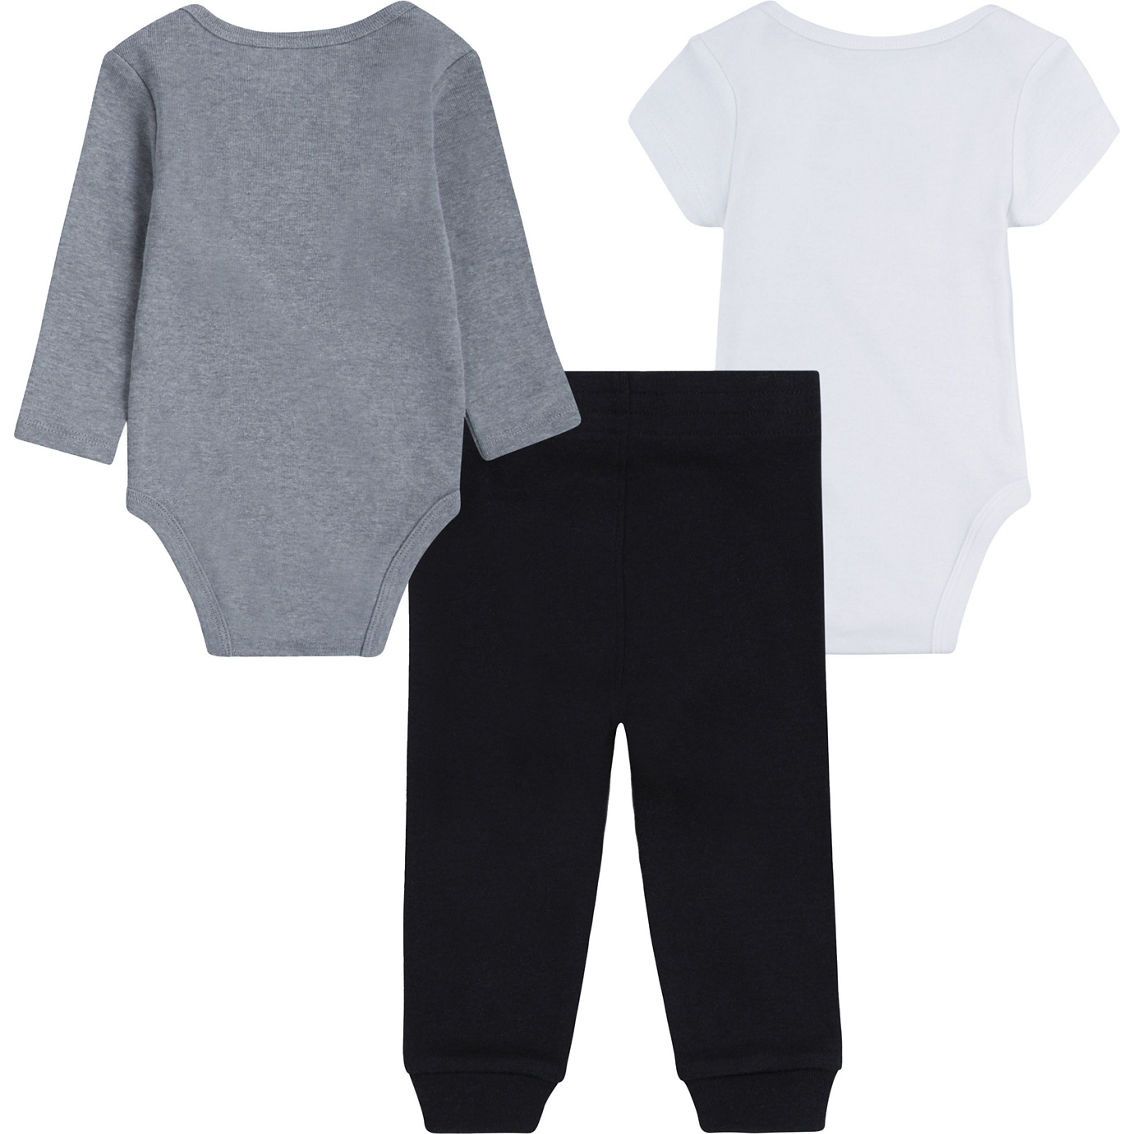 Nike Baby Boys Essentials Bodysuit and Pants 3 pc. Set - Image 2 of 3